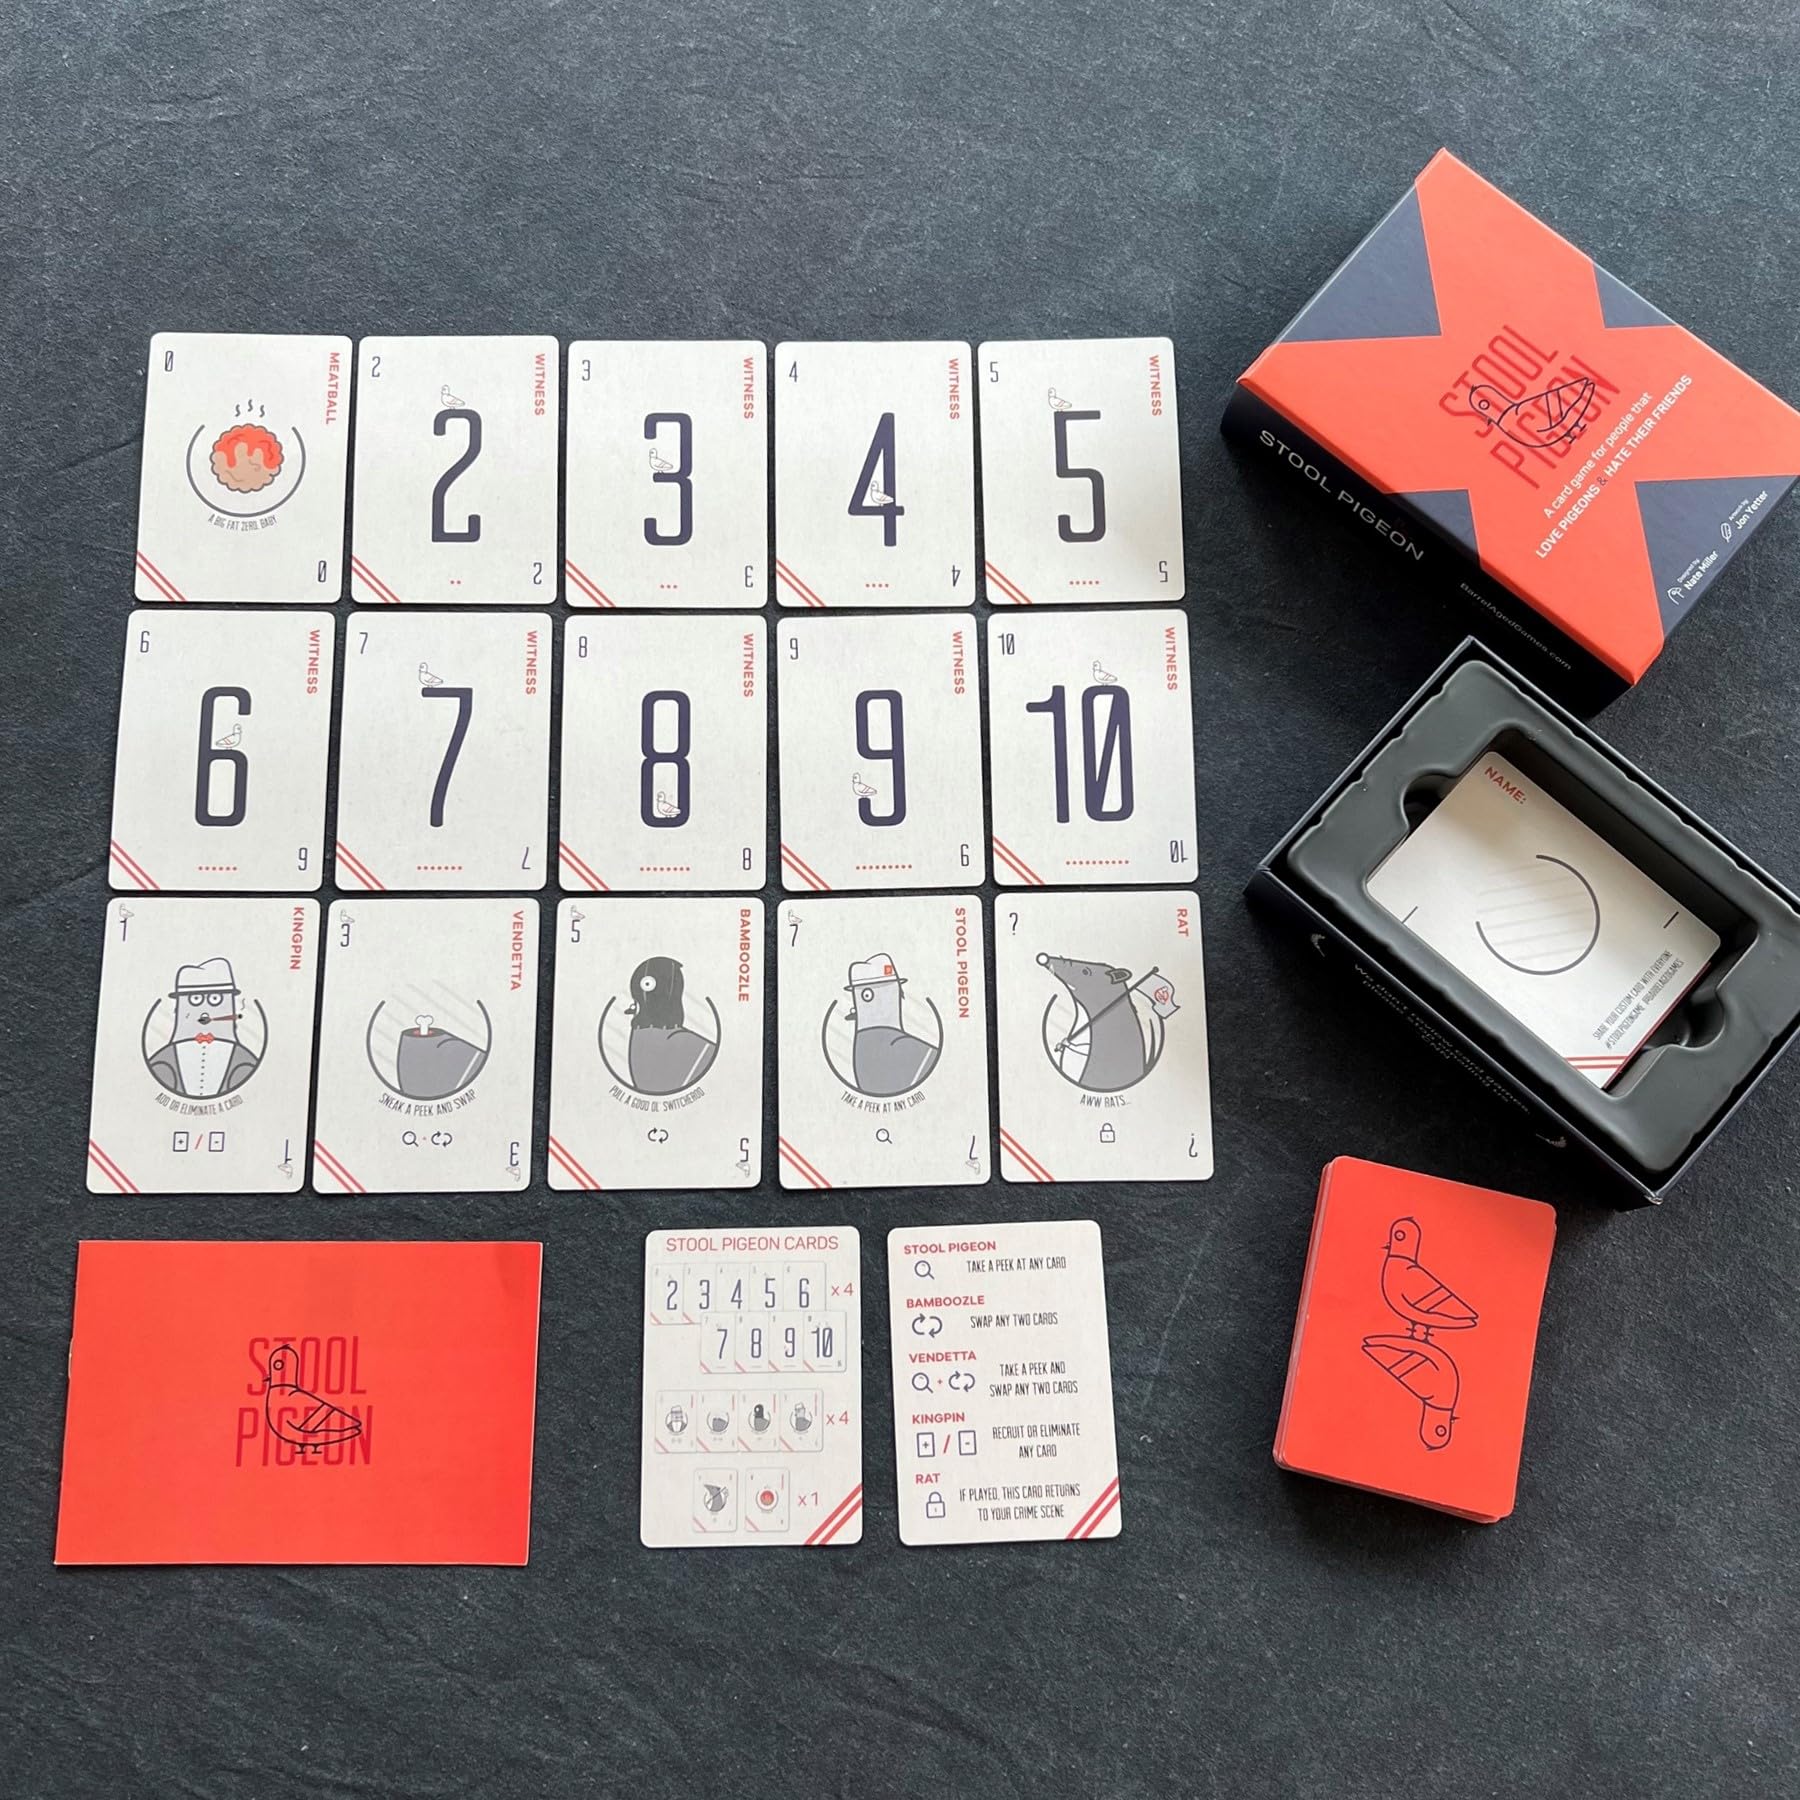 Barrel Aged Games: Stool Pigeon - Tactical Card Game Where You Work As A Pigeon Mafia Family & Make Life Harder for Your Rivals, Ages 8+, 2-6 Players